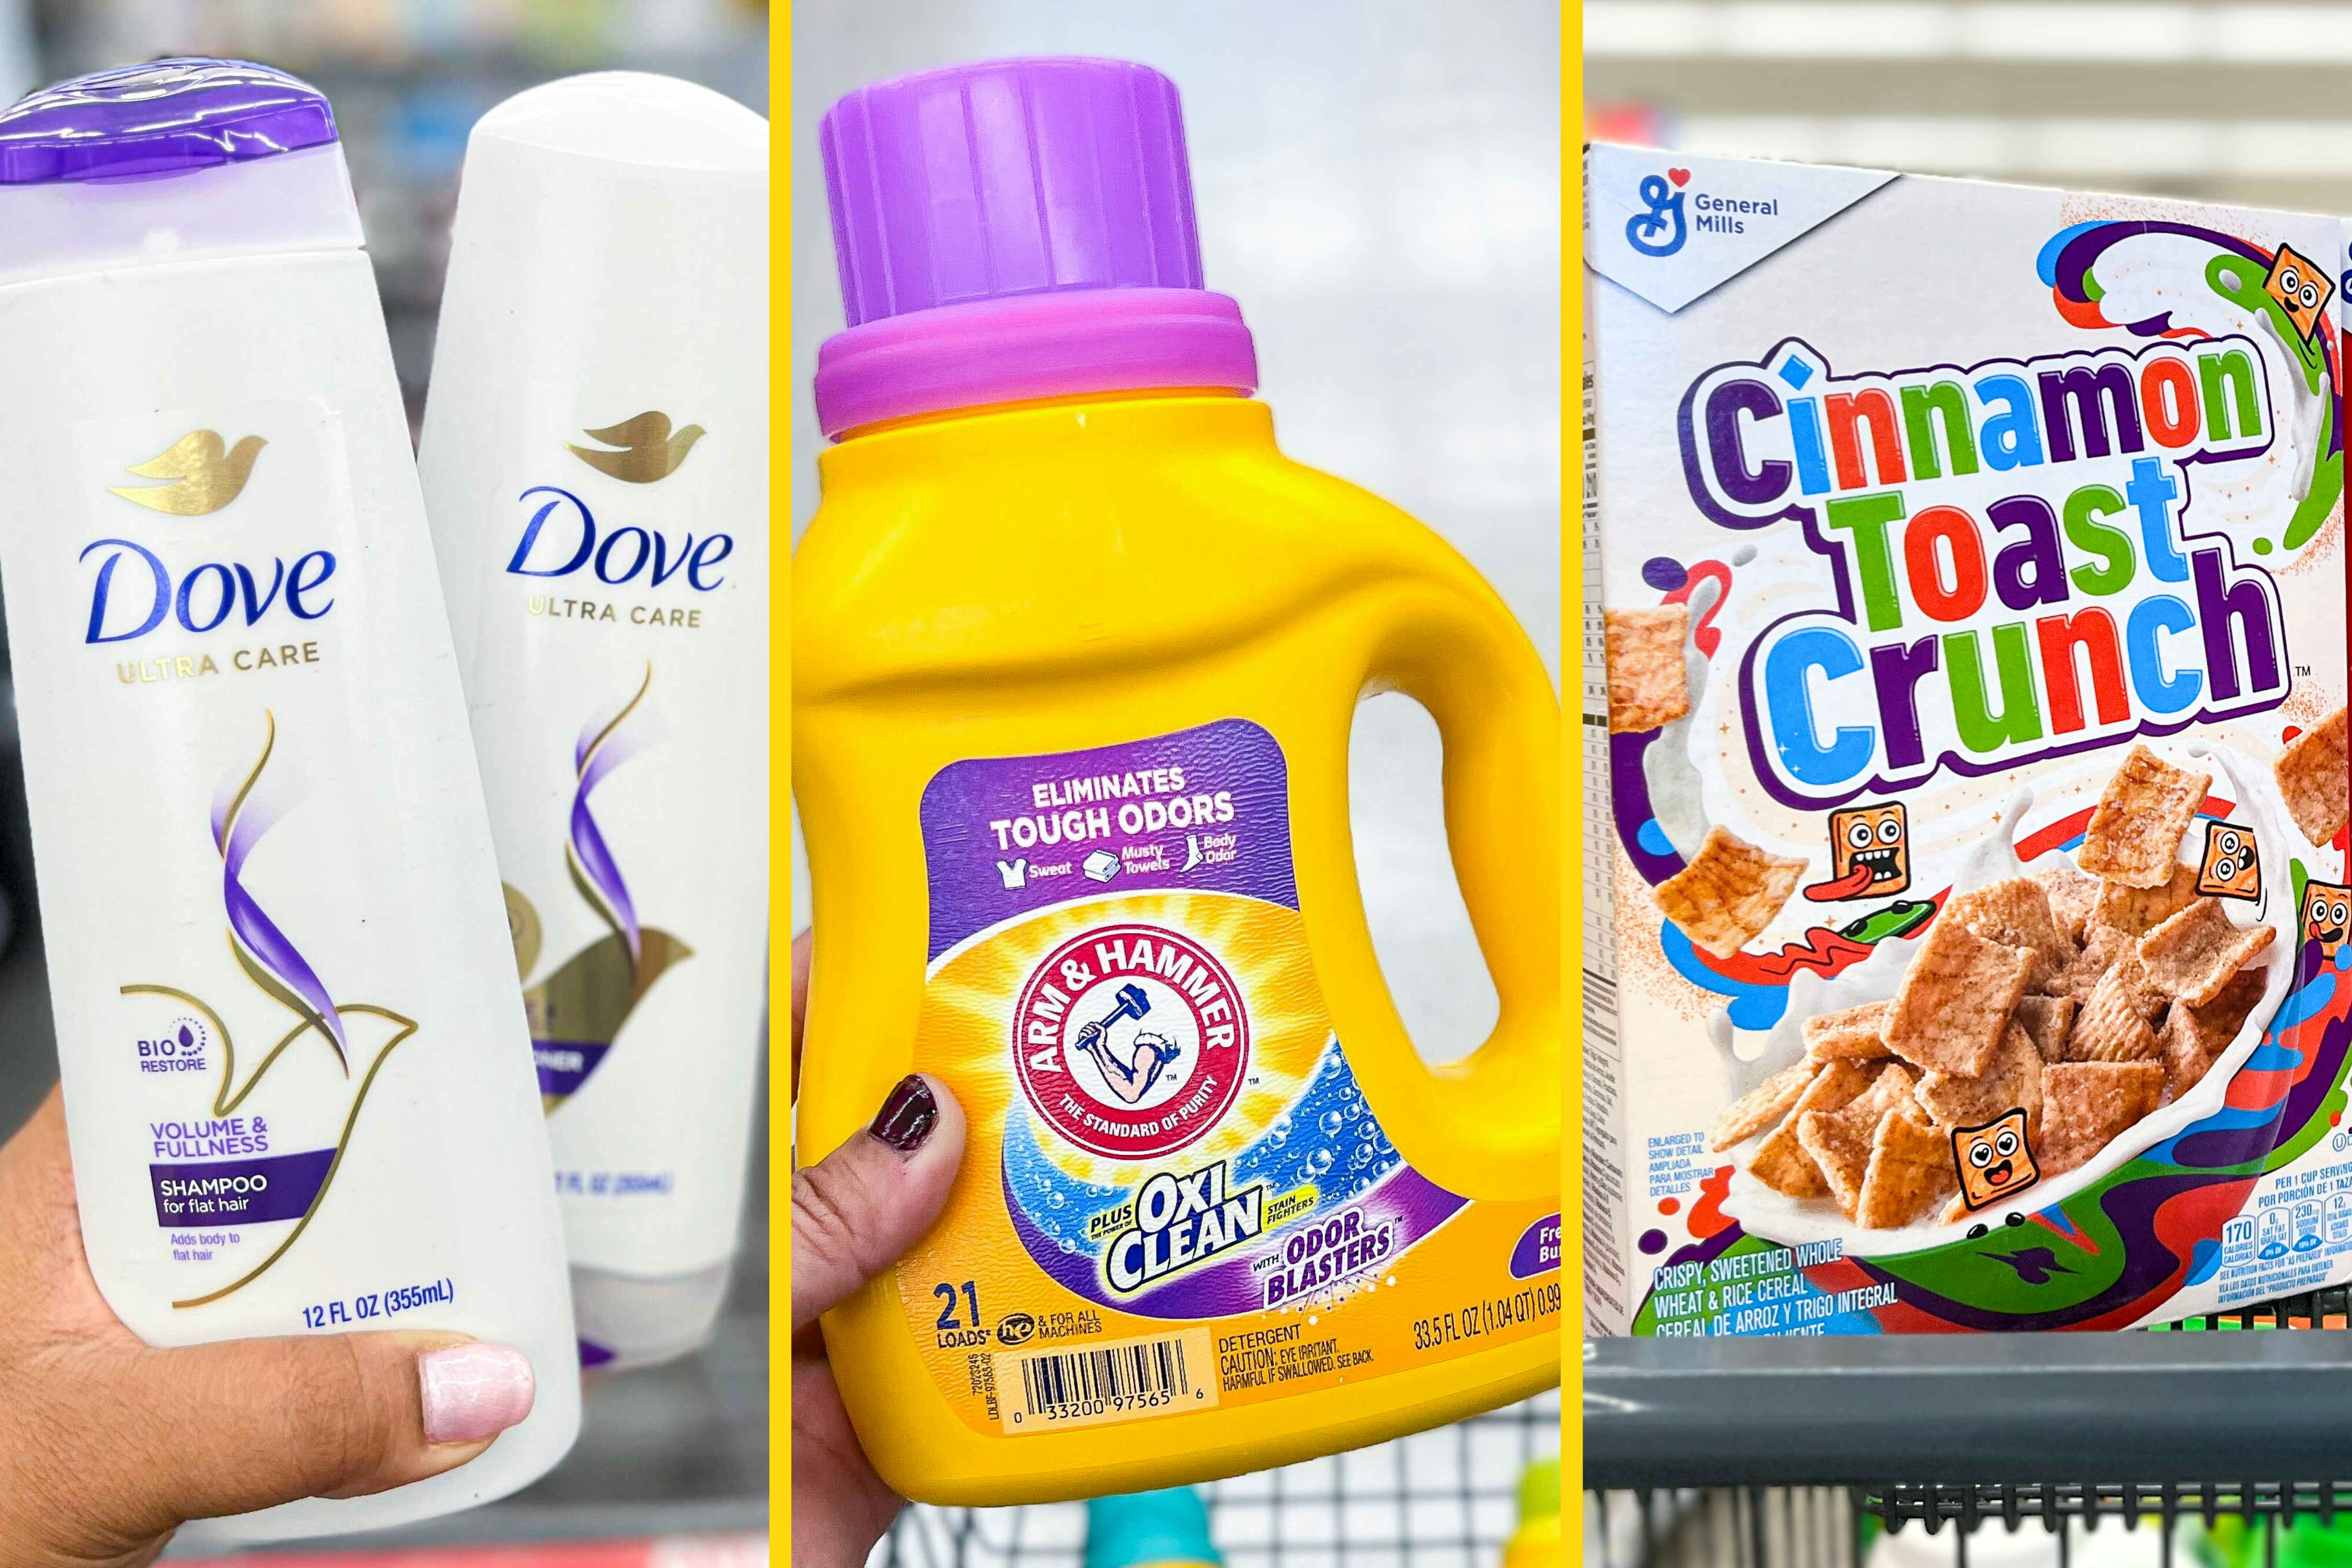 Best Coupon Deals This Week: Free Shampoo, $1 Cereal, $2 Detergent